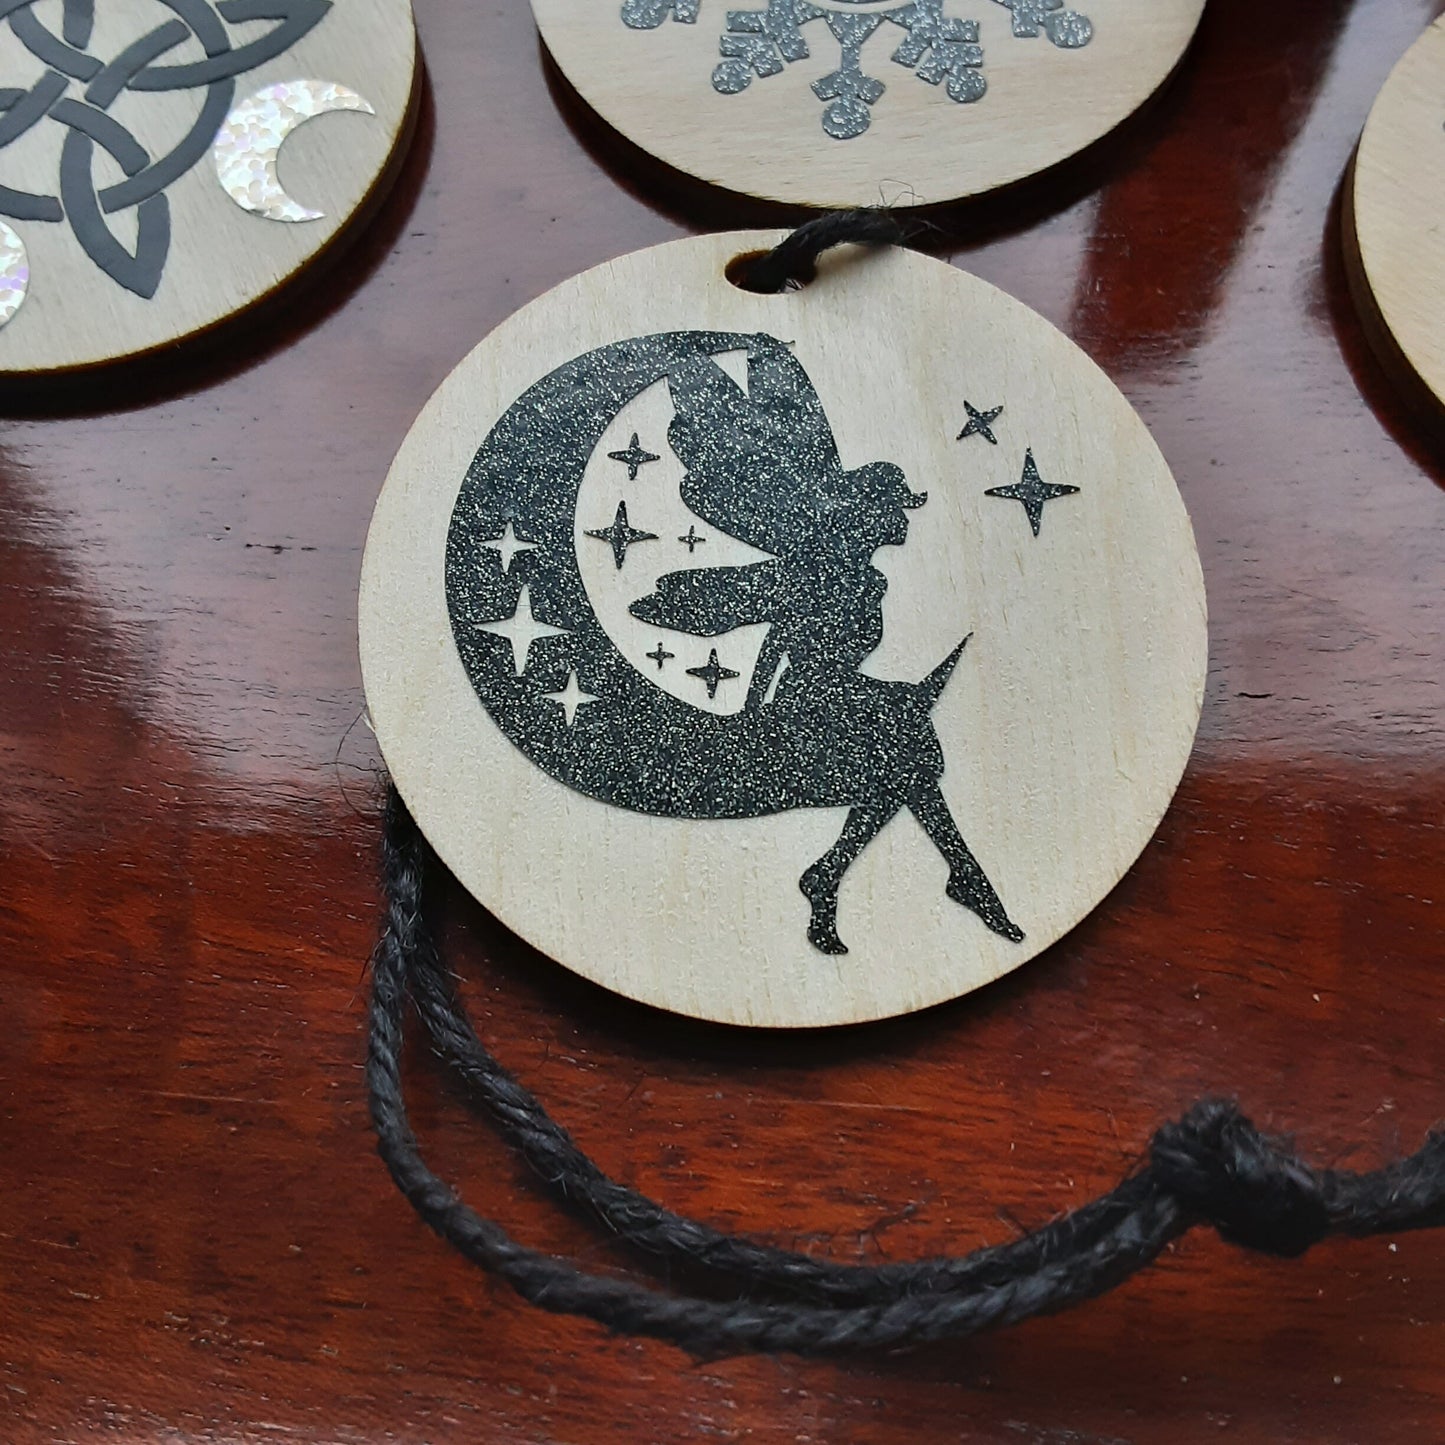 Yule ornament, 1 pc wooden decor, Pentacle snowflake, Witch knot, Bunny, Fairy,Pagan Holiday decor, Witchy Gothic vibes